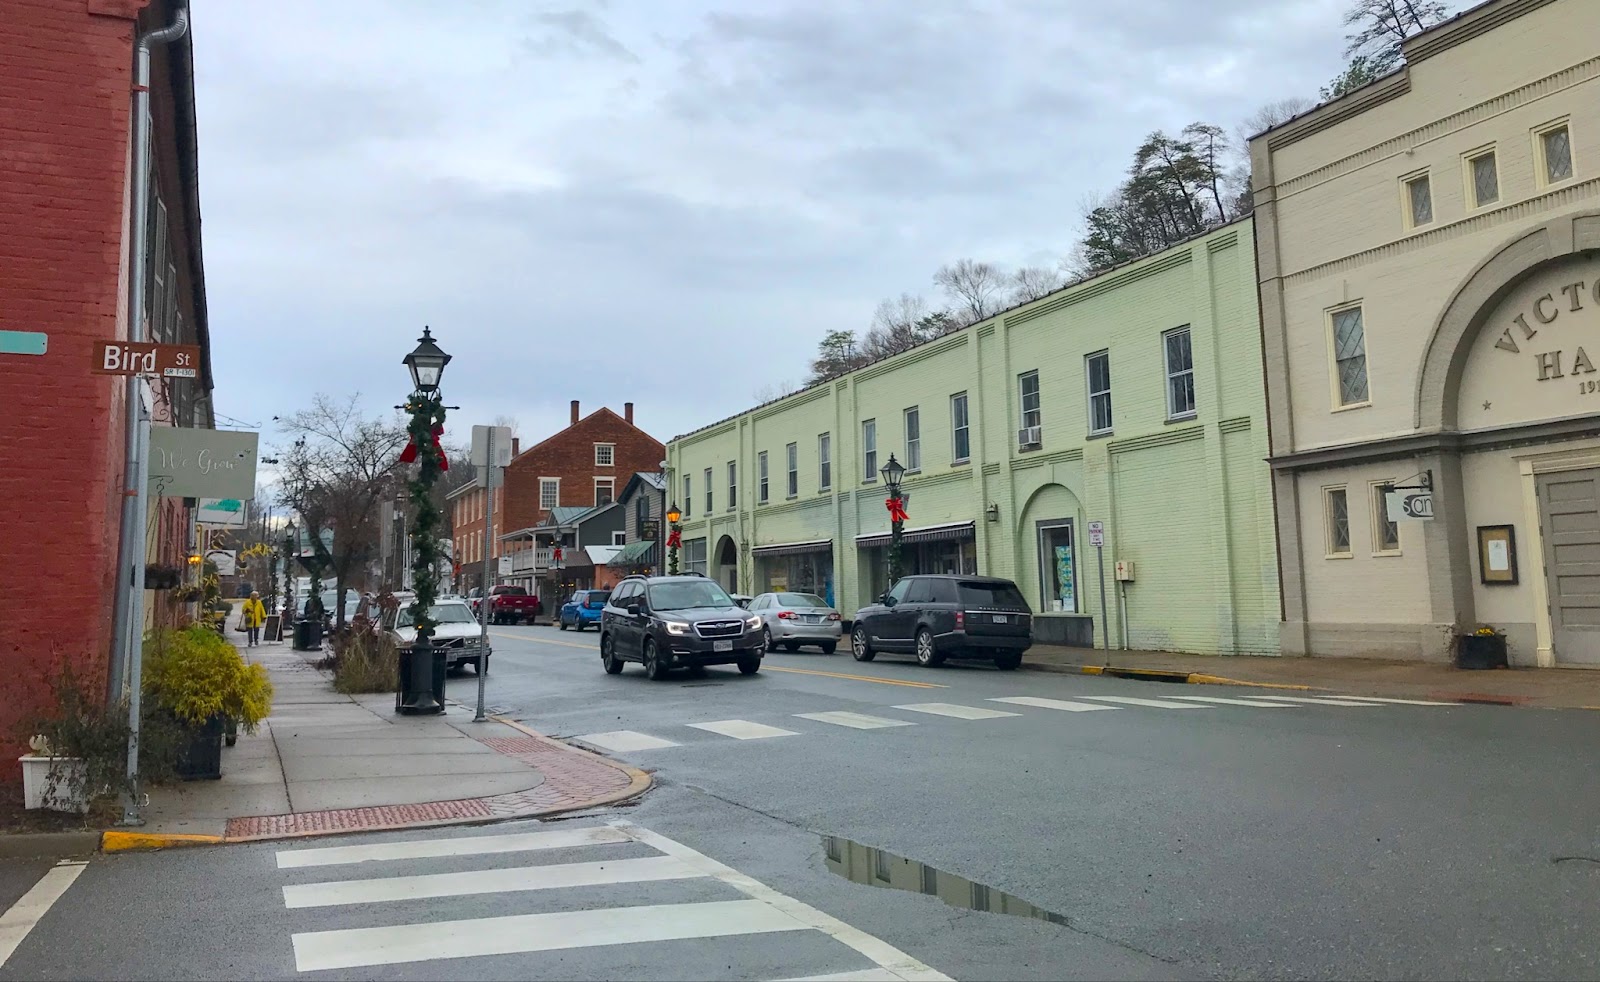 A two-lane street with parking on both sides runs through the middle of a small town, with older brick buildings painted different colors. The lampposts and bare trees are decorated for the winter holidays.